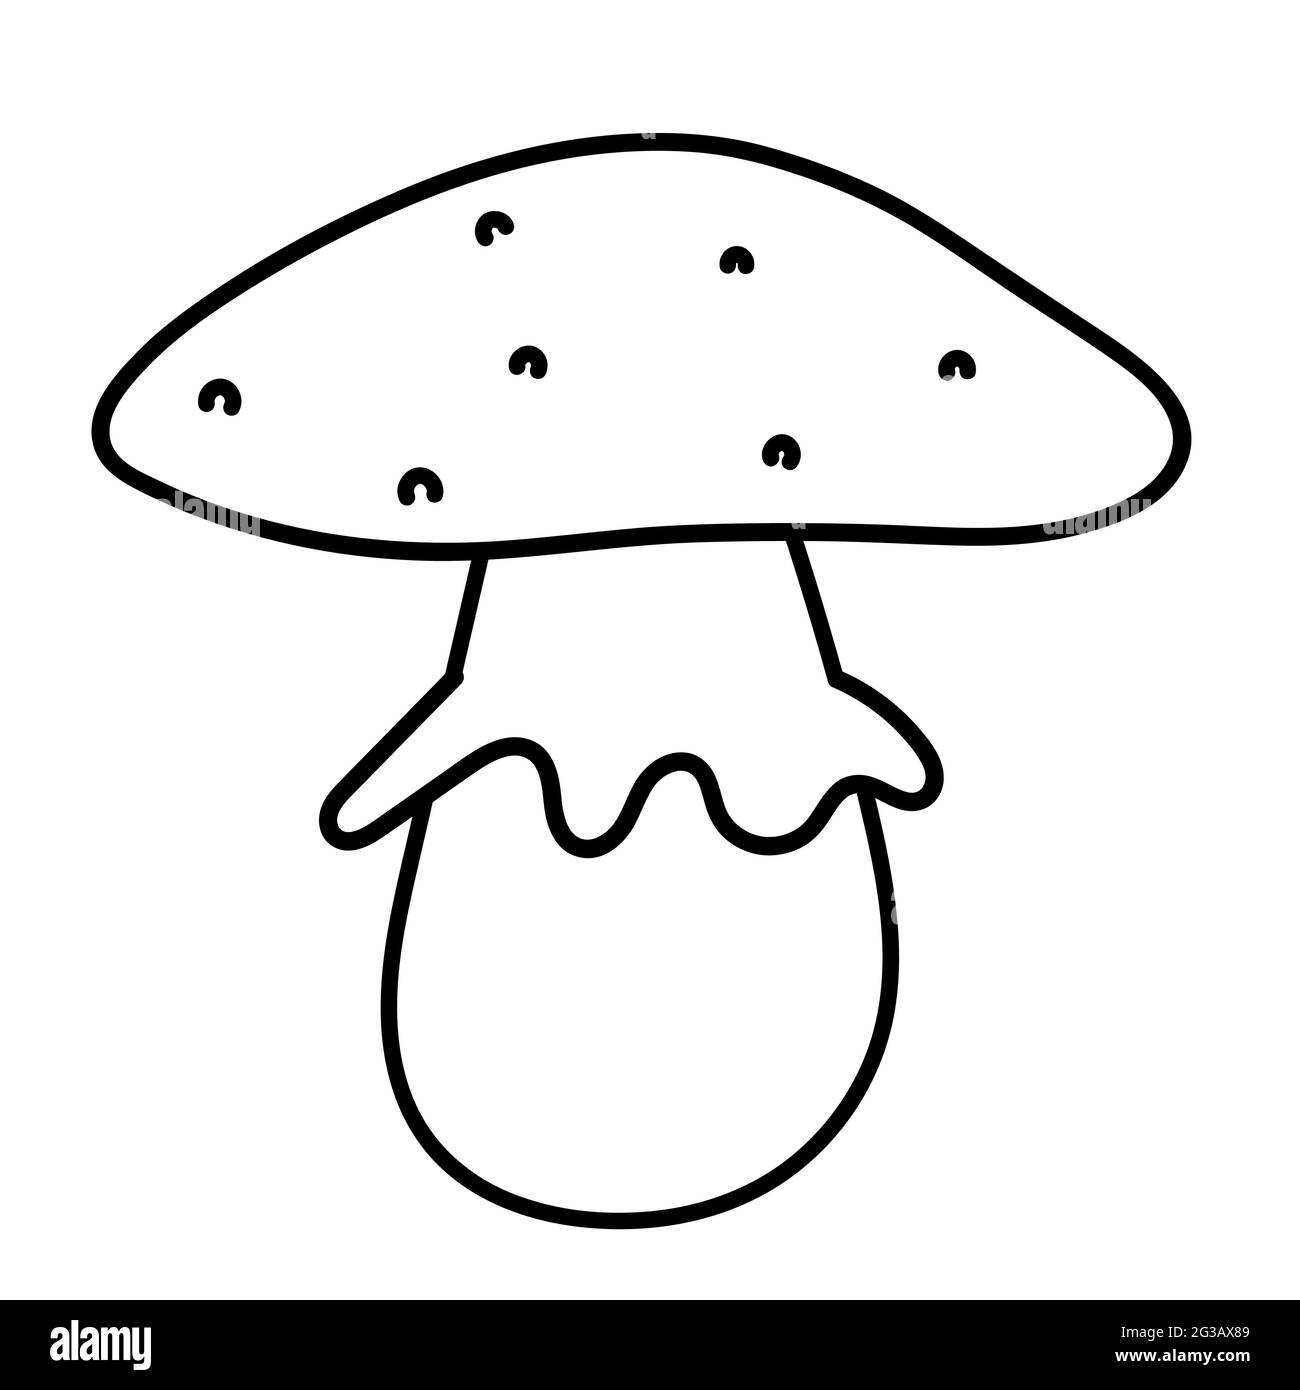 Poisonous mushroom. Amanita, toadstool. Vector illustration in doodle style. Stock Vector